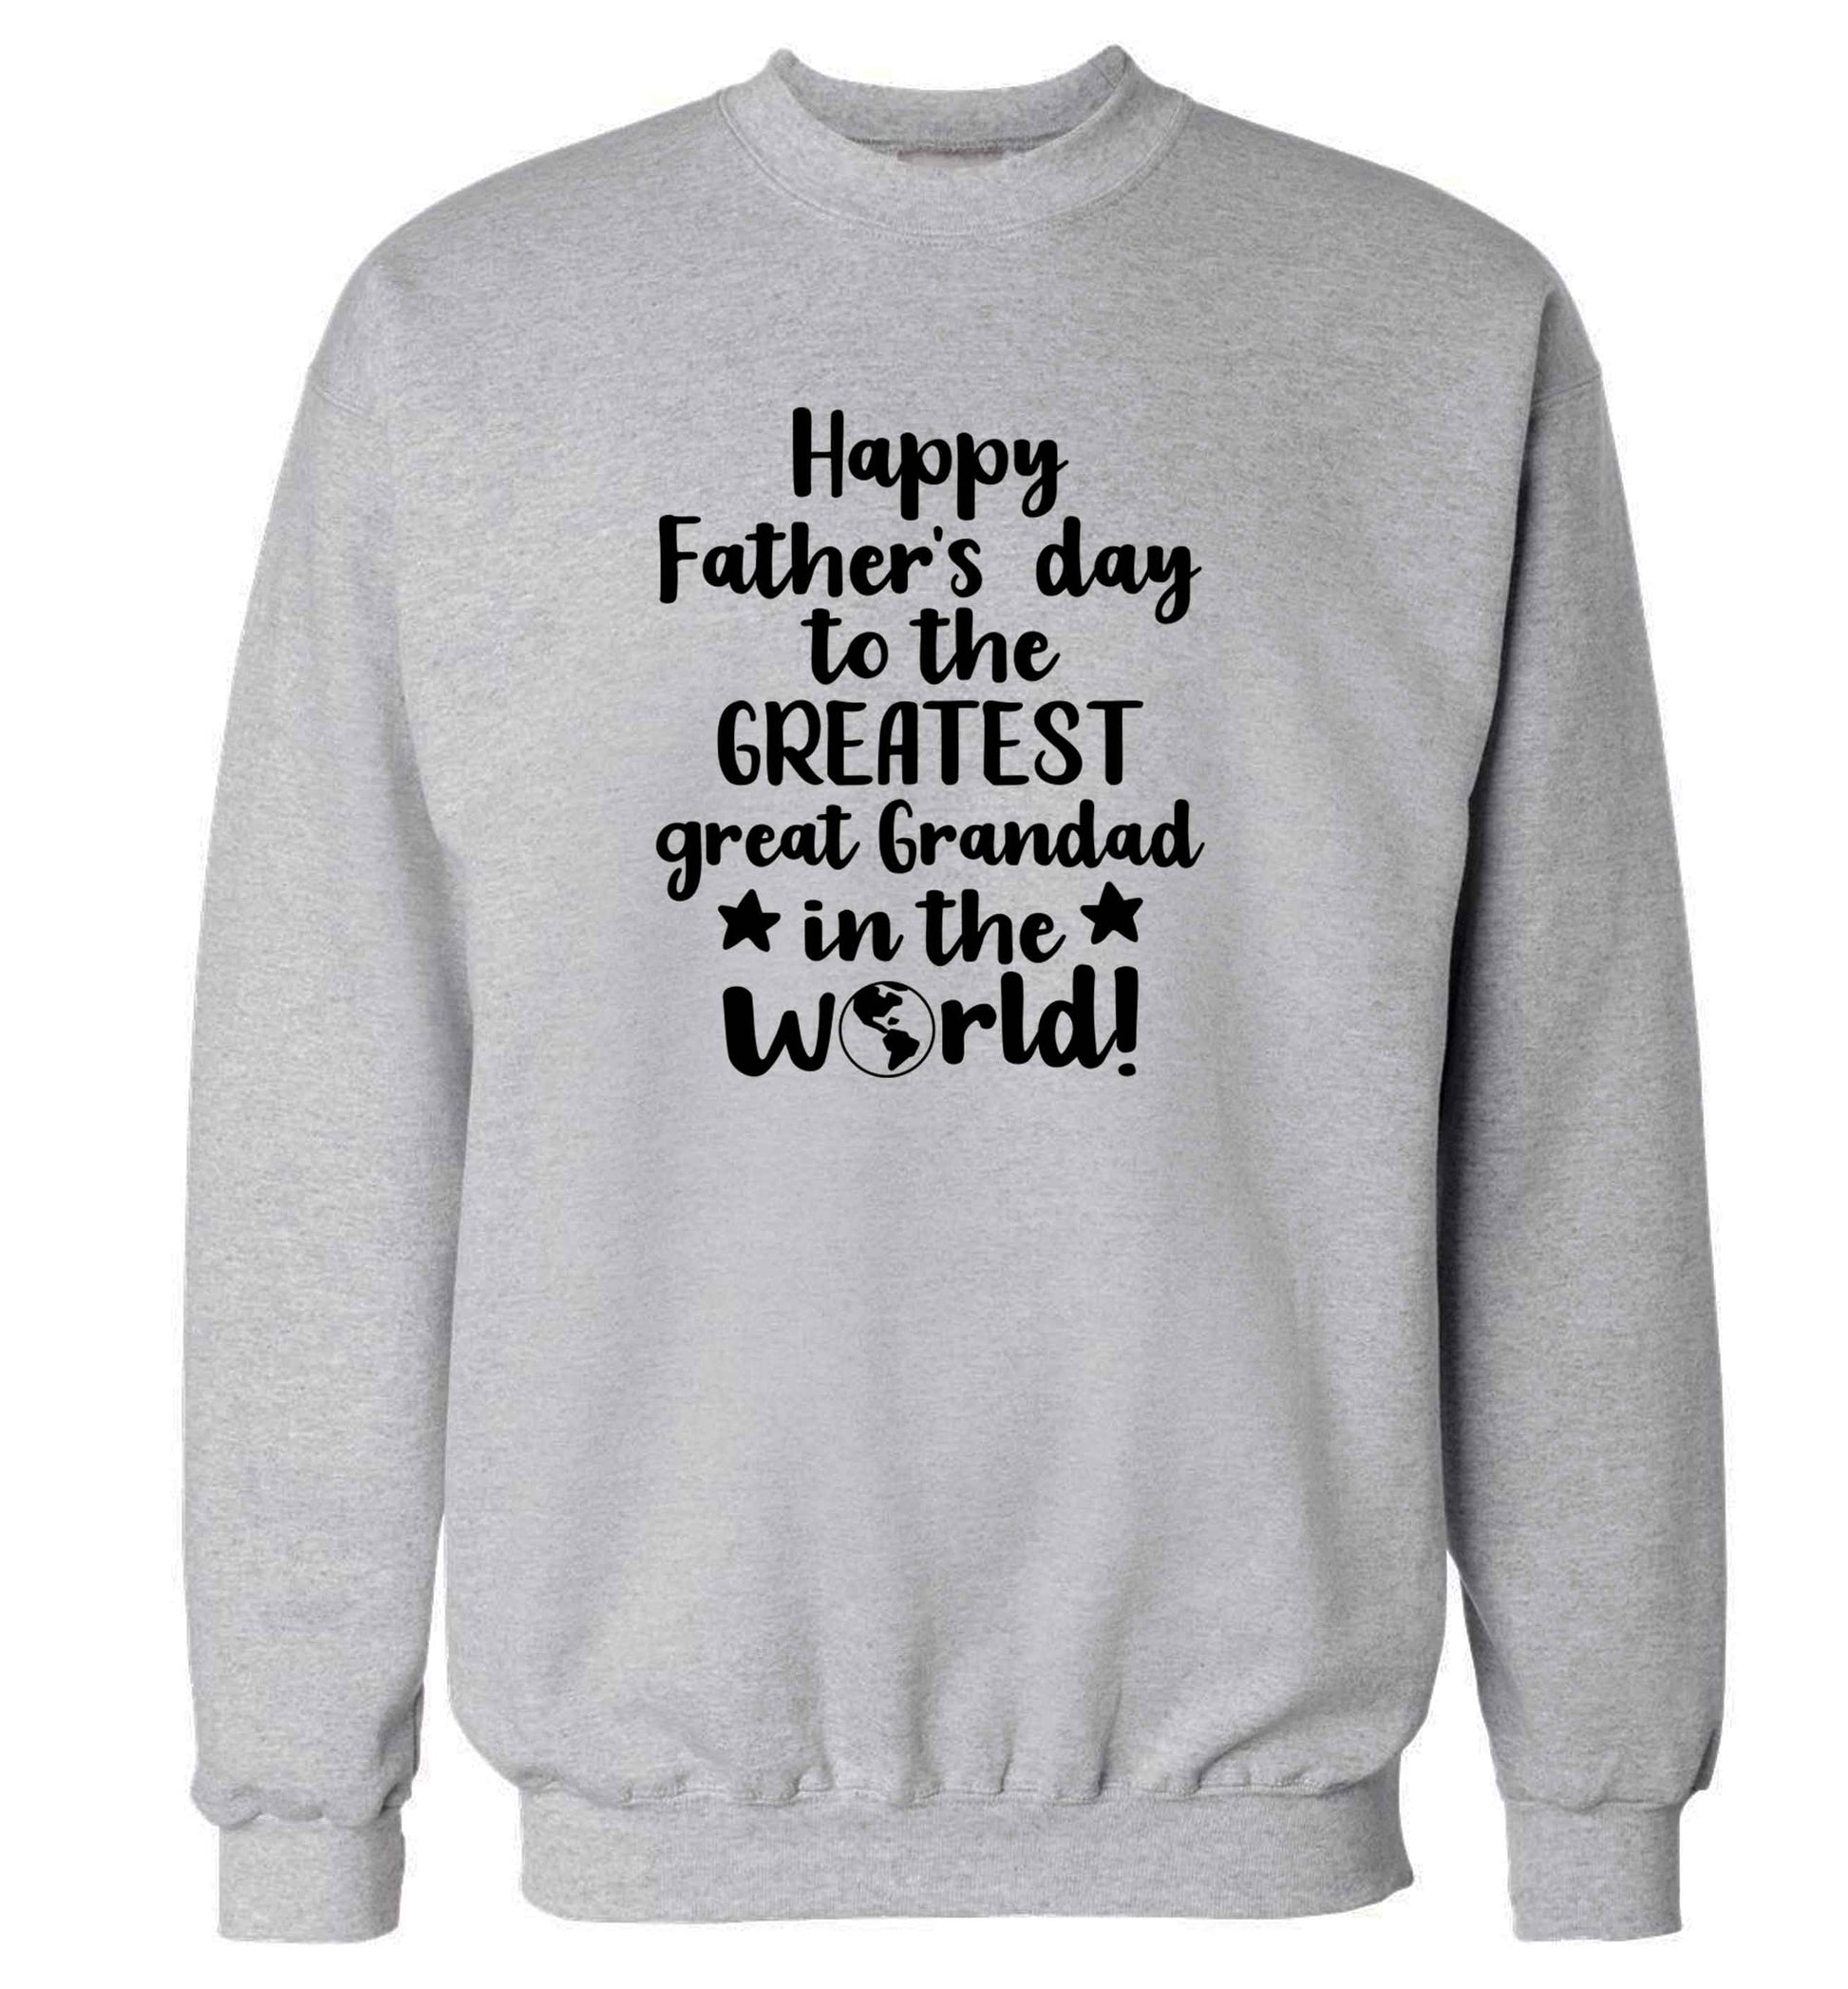 Happy Father's day to the greatest great grandad in the world adult's unisex grey sweater 2XL